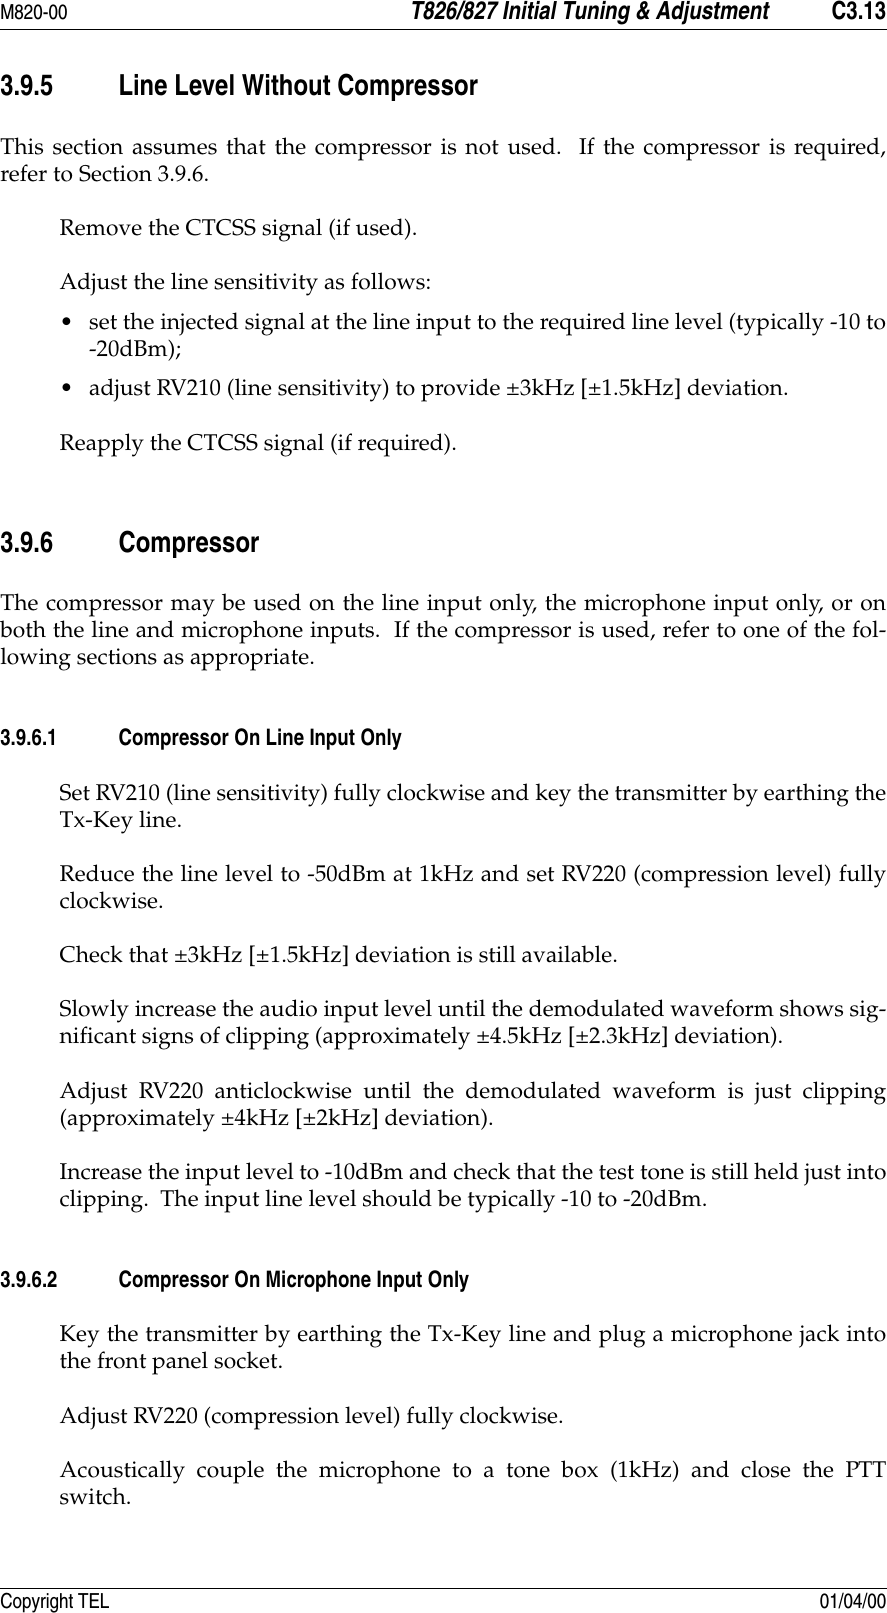 M820-00 T826/827 Initial Tuning &amp; Adjustment C3.13Copyright TEL 01/04/003.9.5 Line Level Without CompressorThis section assumes that the compressor is not used.  If the compressor is required,refer to Section 3.9.6.Remove the CTCSS signal (if used).Adjust the line sensitivity as follows: • set the injected signal at the line input to the required line level (typically -10 to-20dBm);• adjust RV210 (line sensitivity) to provide ±3kHz [±1.5kHz] deviation.Reapply the CTCSS signal (if required).3.9.6 CompressorThe compressor may be used on the line input only, the microphone input only, or onboth the line and microphone inputs.  If the compressor is used, refer to one of the fol-lowing sections as appropriate.3.9.6.1 Compressor On Line Input OnlySet RV210 (line sensitivity) fully clockwise and key the transmitter by earthing theTx-Key line.Reduce the line level to -50dBm at 1kHz and set RV220 (compression level) fullyclockwise.Check that ±3kHz [±1.5kHz] deviation is still available.Slowly increase the audio input level until the demodulated waveform shows sig-nificant signs of clipping (approximately ±4.5kHz [±2.3kHz] deviation).Adjust RV220 anticlockwise until the demodulated waveform is just clipping(approximately ±4kHz [±2kHz] deviation).Increase the input level to -10dBm and check that the test tone is still held just intoclipping.  The input line level should be typically -10 to -20dBm.3.9.6.2 Compressor On Microphone Input OnlyKey the transmitter by earthing the Tx-Key line and plug a microphone jack intothe front panel socket.Adjust RV220 (compression level) fully clockwise.Acoustically couple the microphone to a tone box (1kHz) and close the PTTswitch.